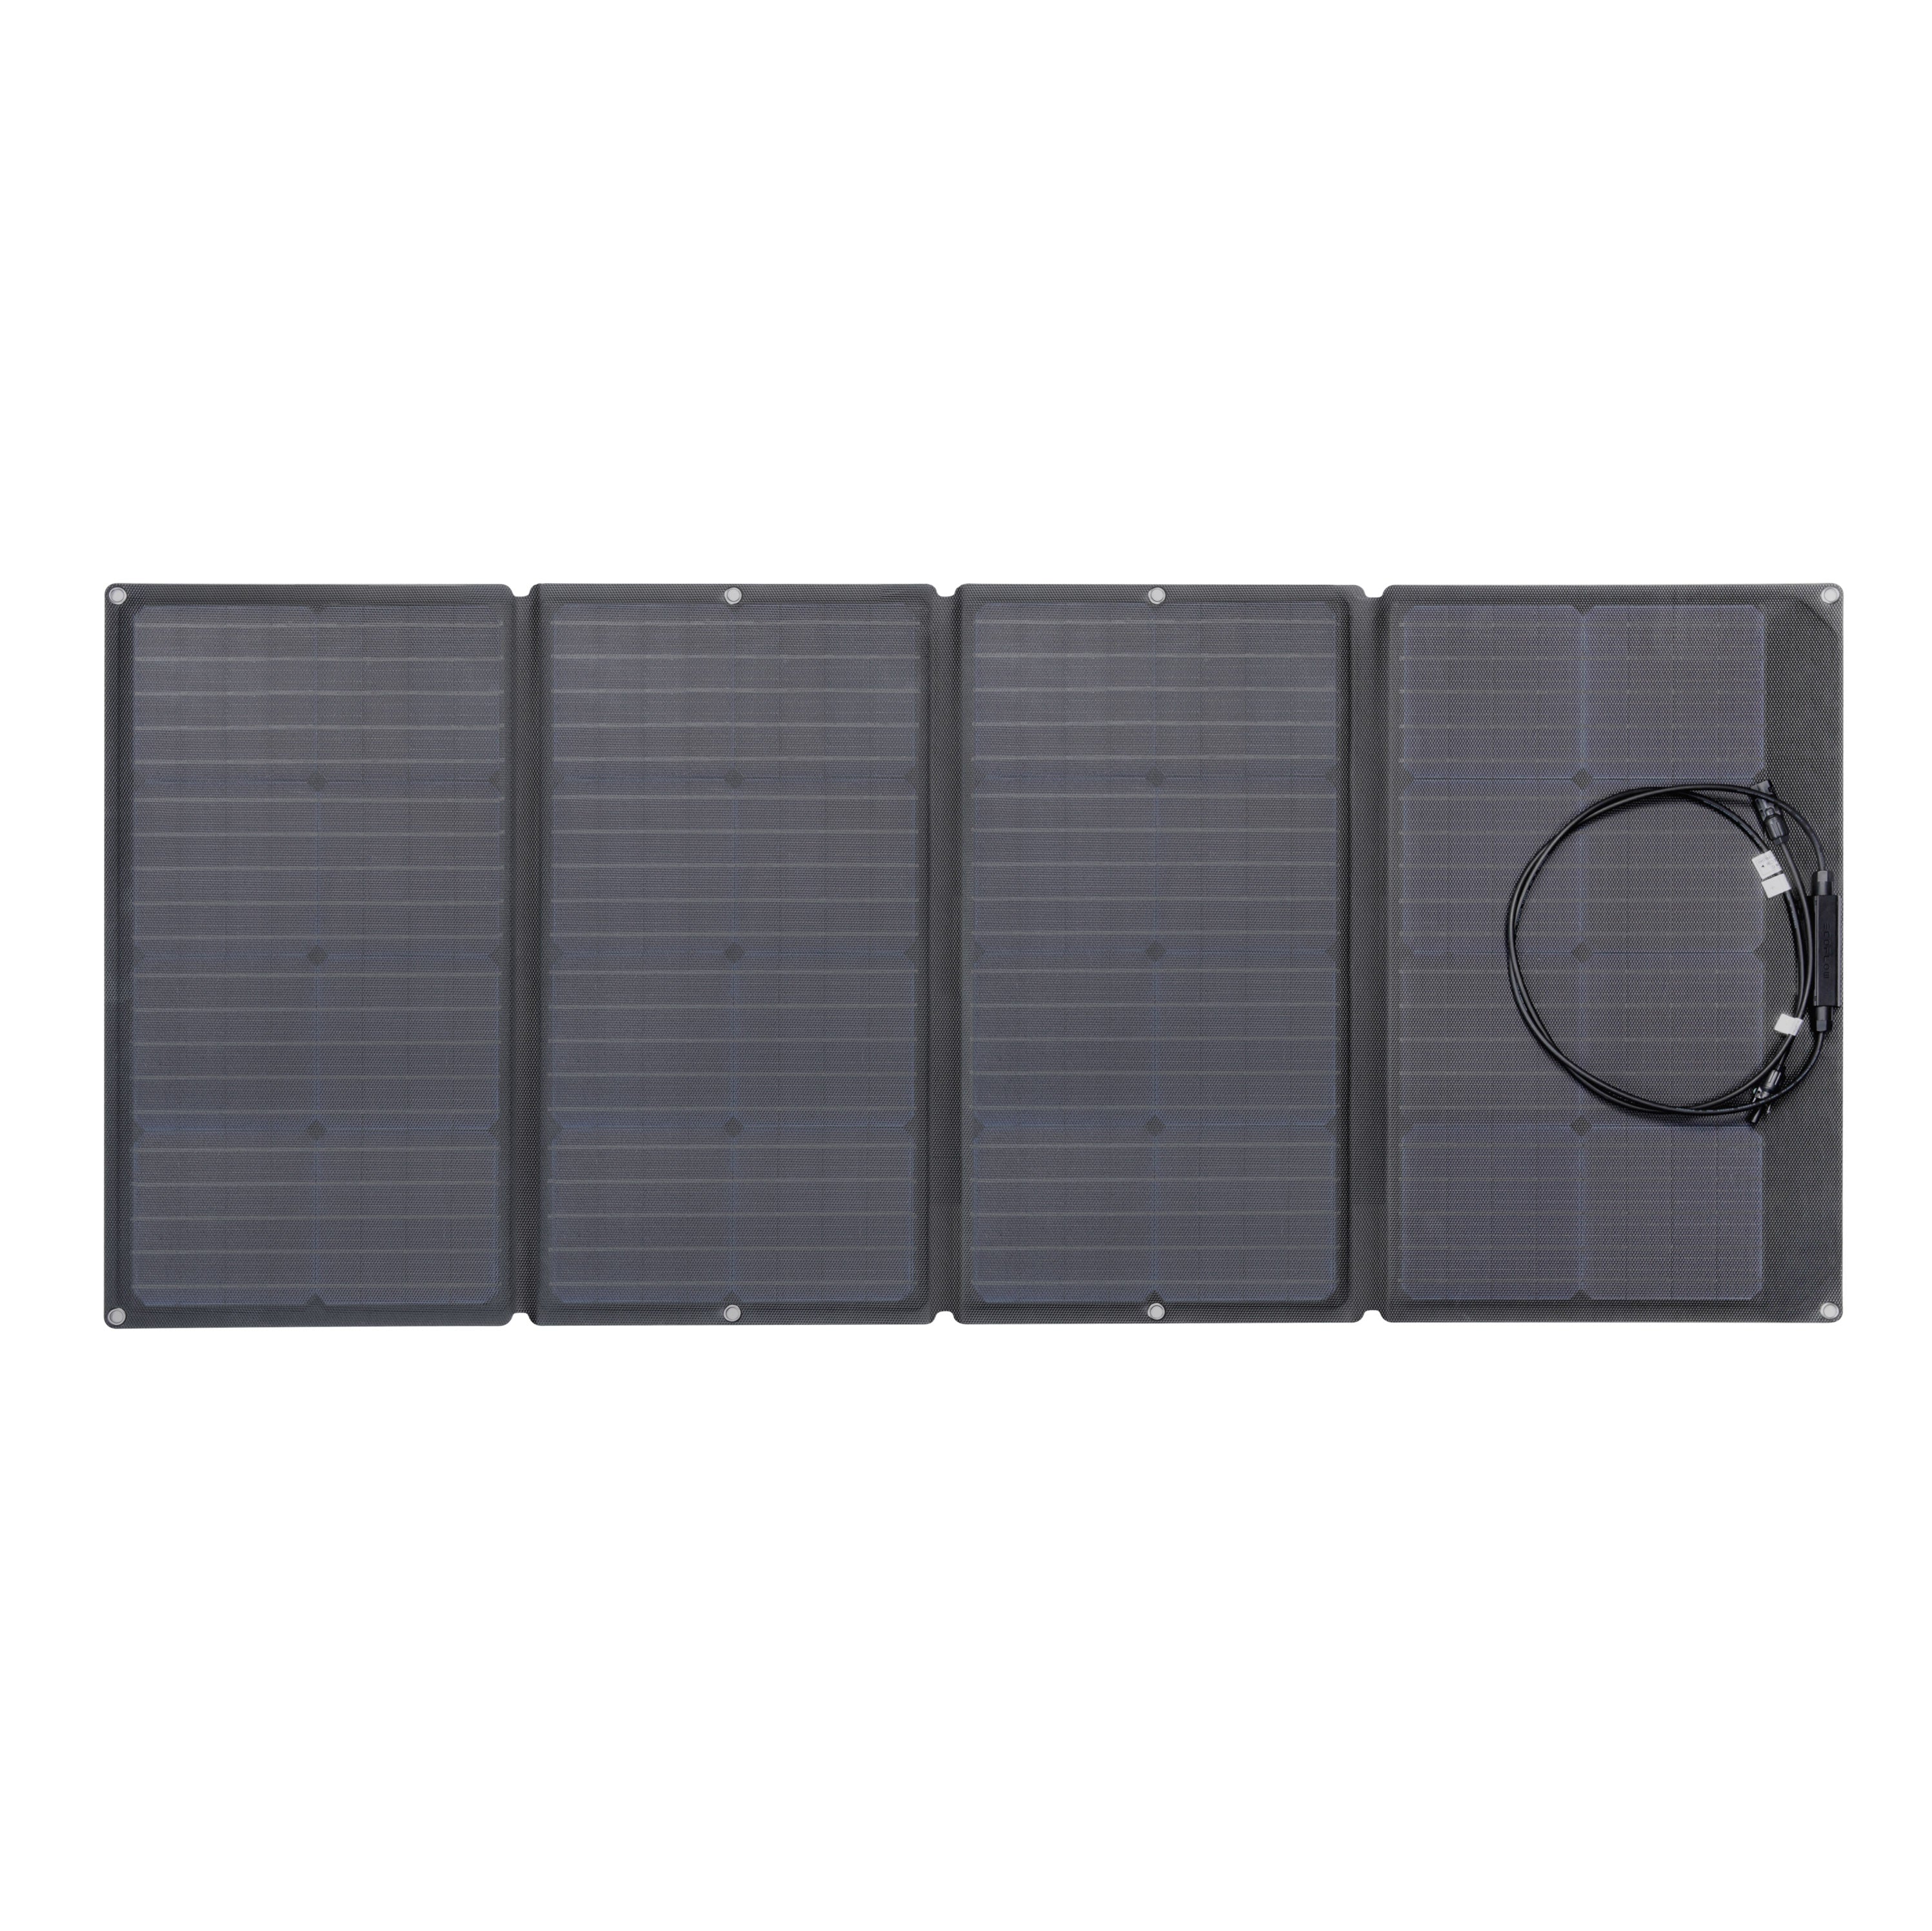 ECOFLOW 160 Watt Portable Solar Panel for Power Station, Foldable Solar Charger with Adjustable Kickstand